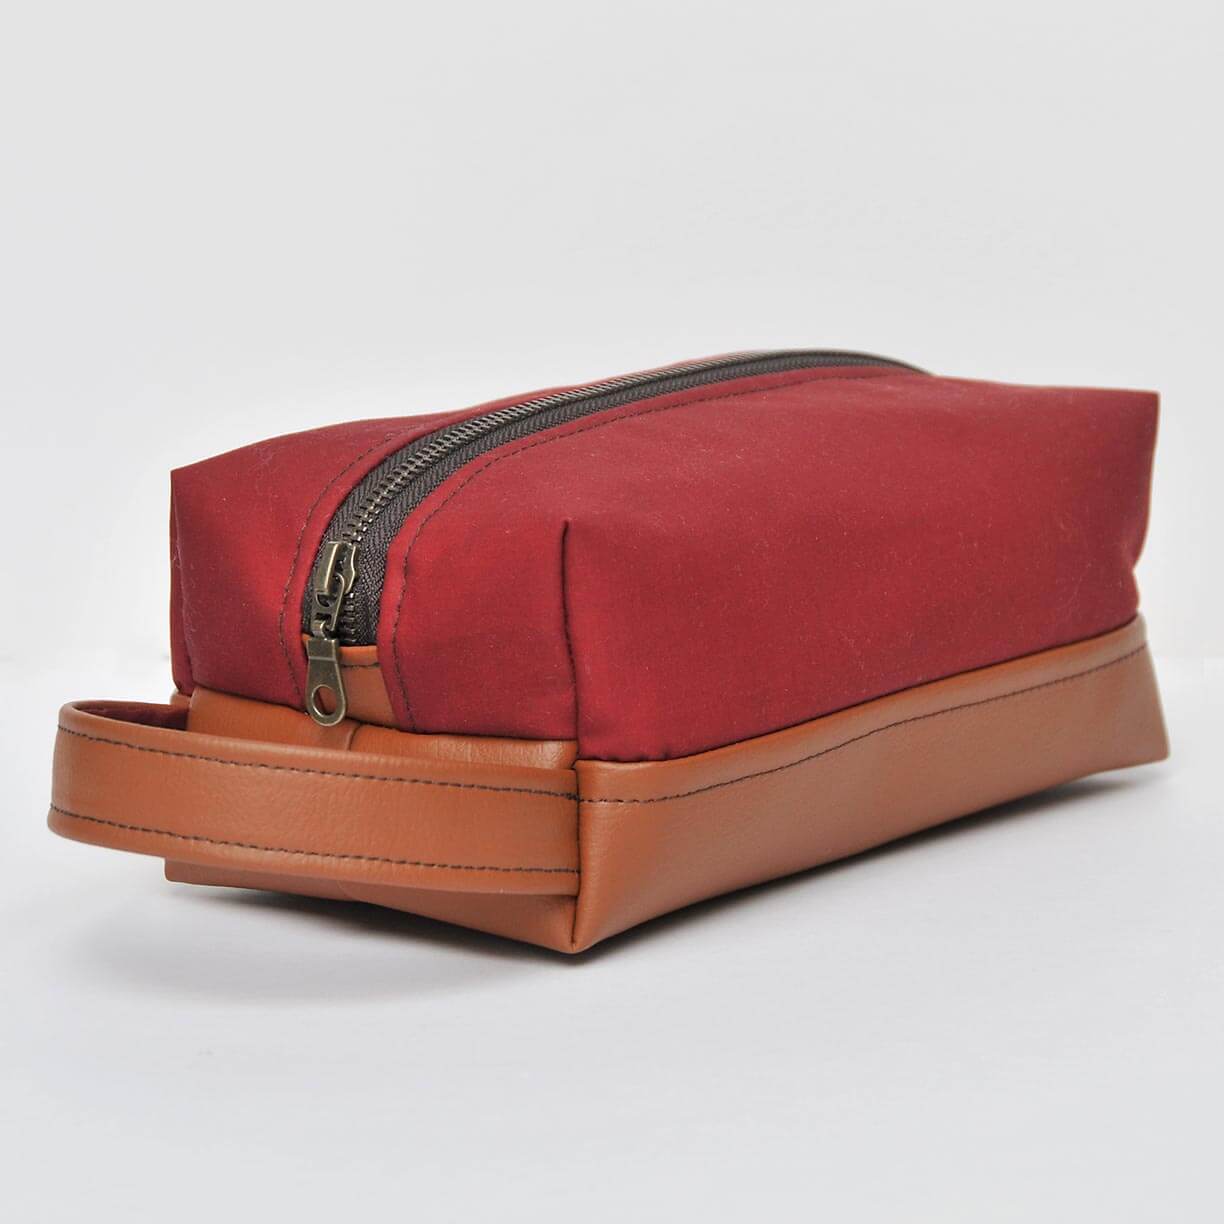 Lauren Holloway Bag Red Unisex Recycled Leather Dopp Bag (Toiletries / Wash Bag)